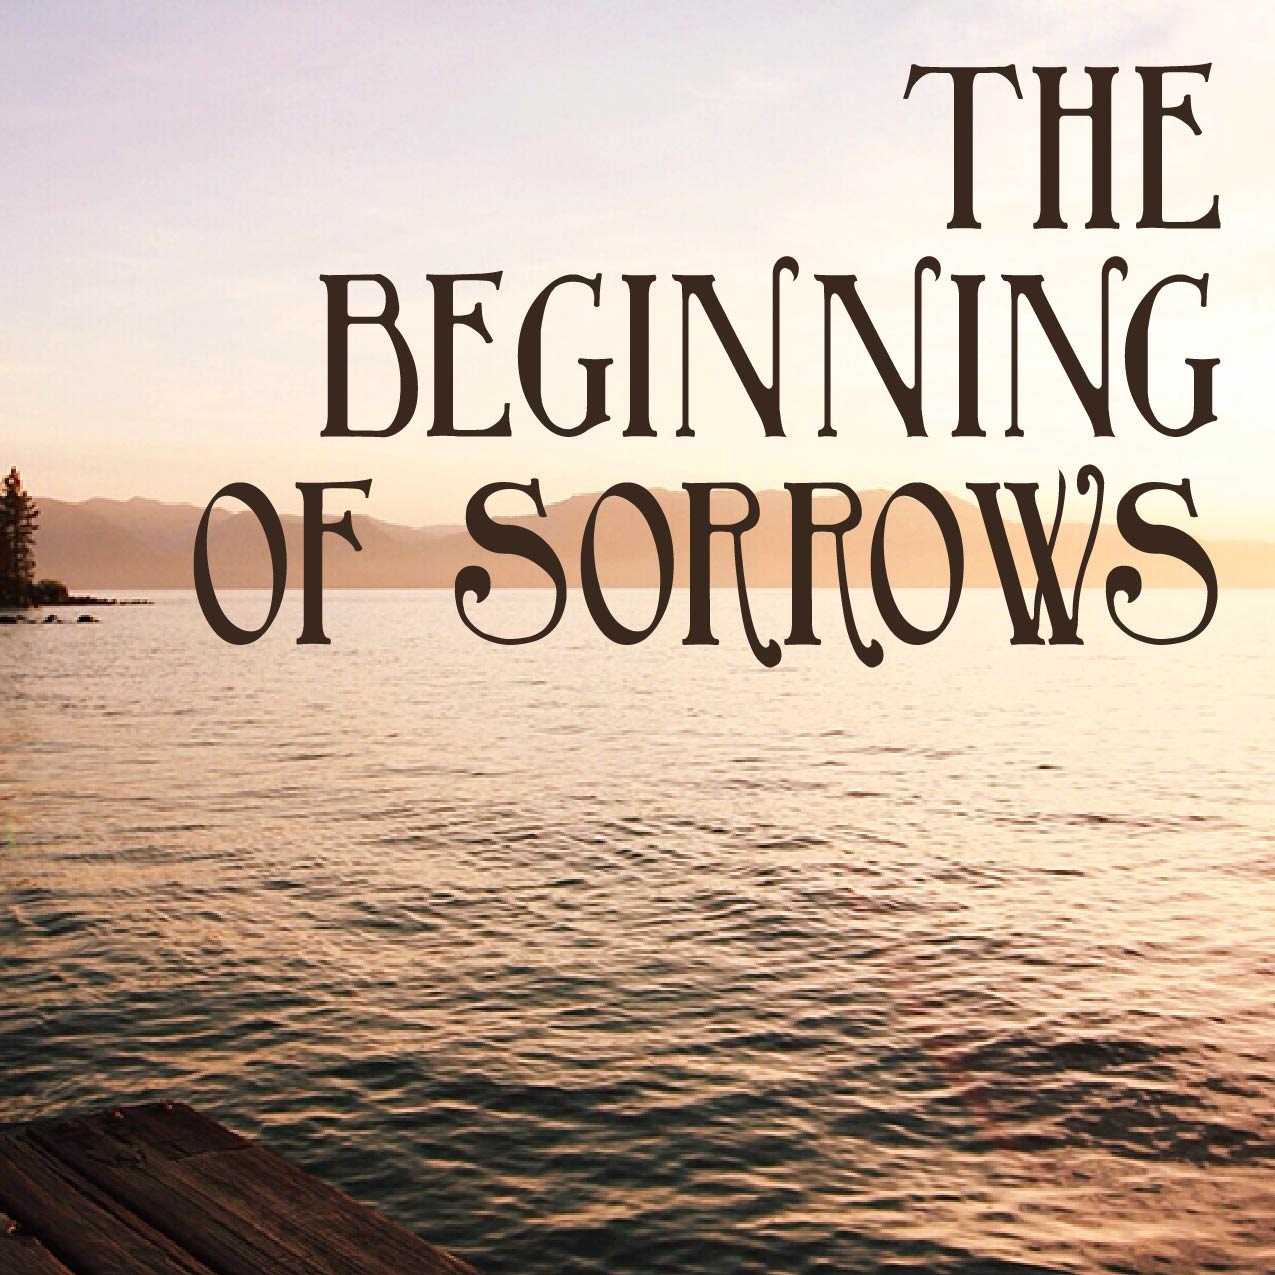 The Beginning of Sorrows